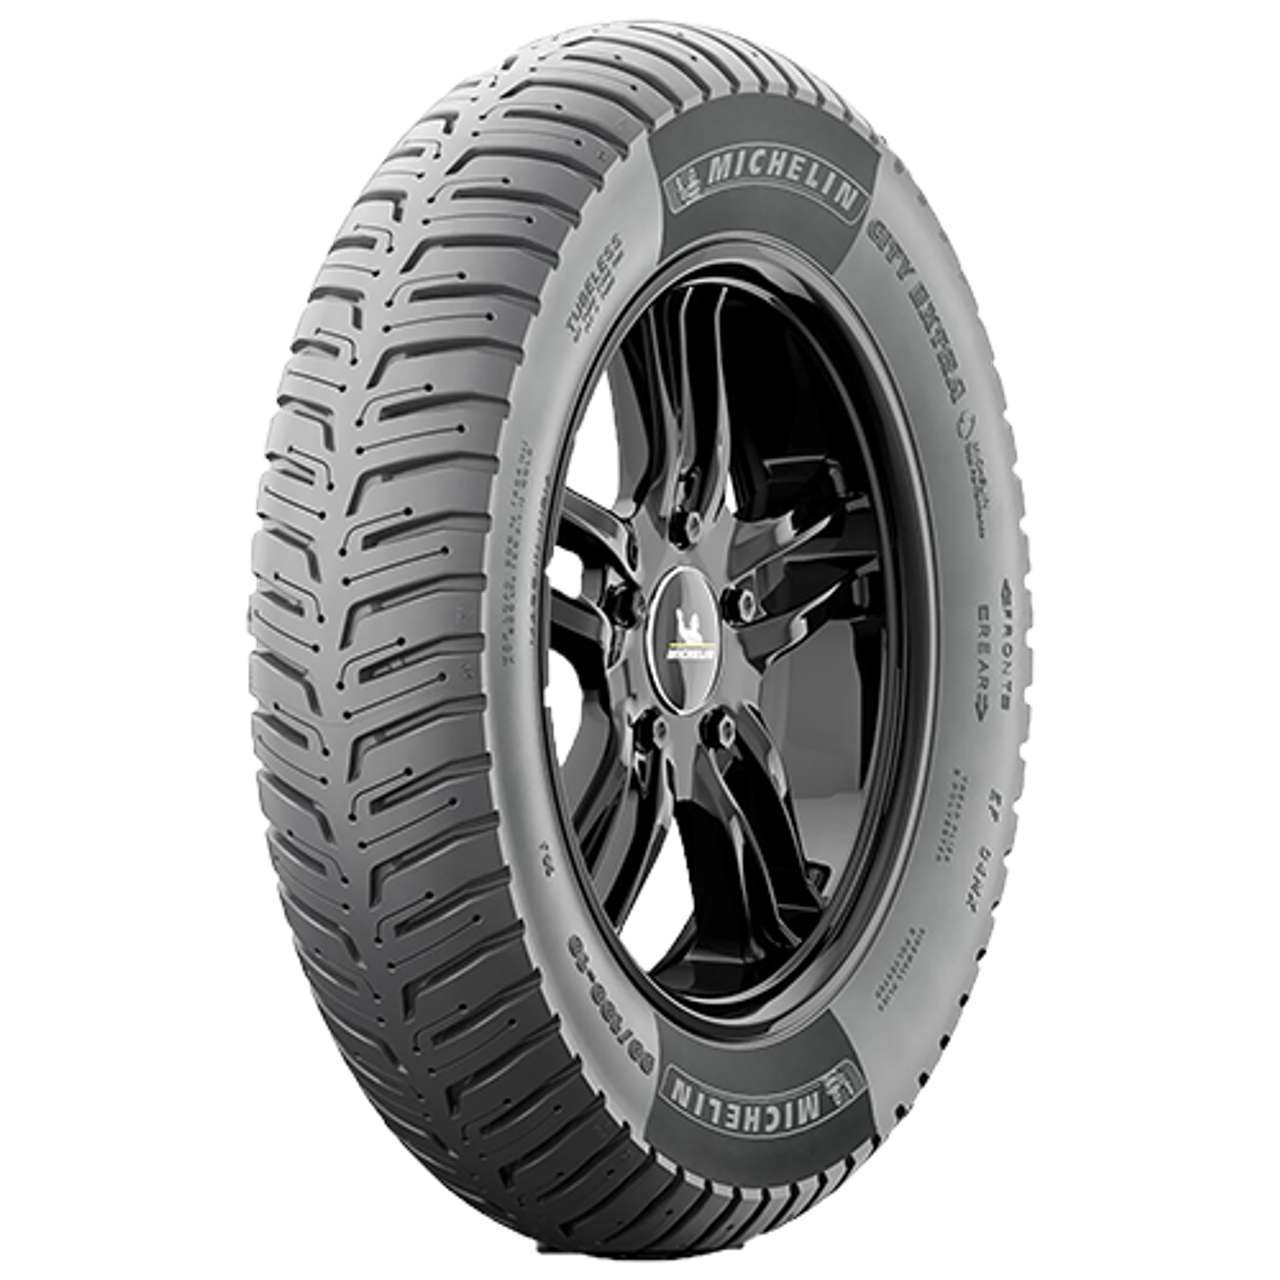 MICHELIN CITY EXTRA 110/70 - 13 M/C TL 48S FRONT/REAR